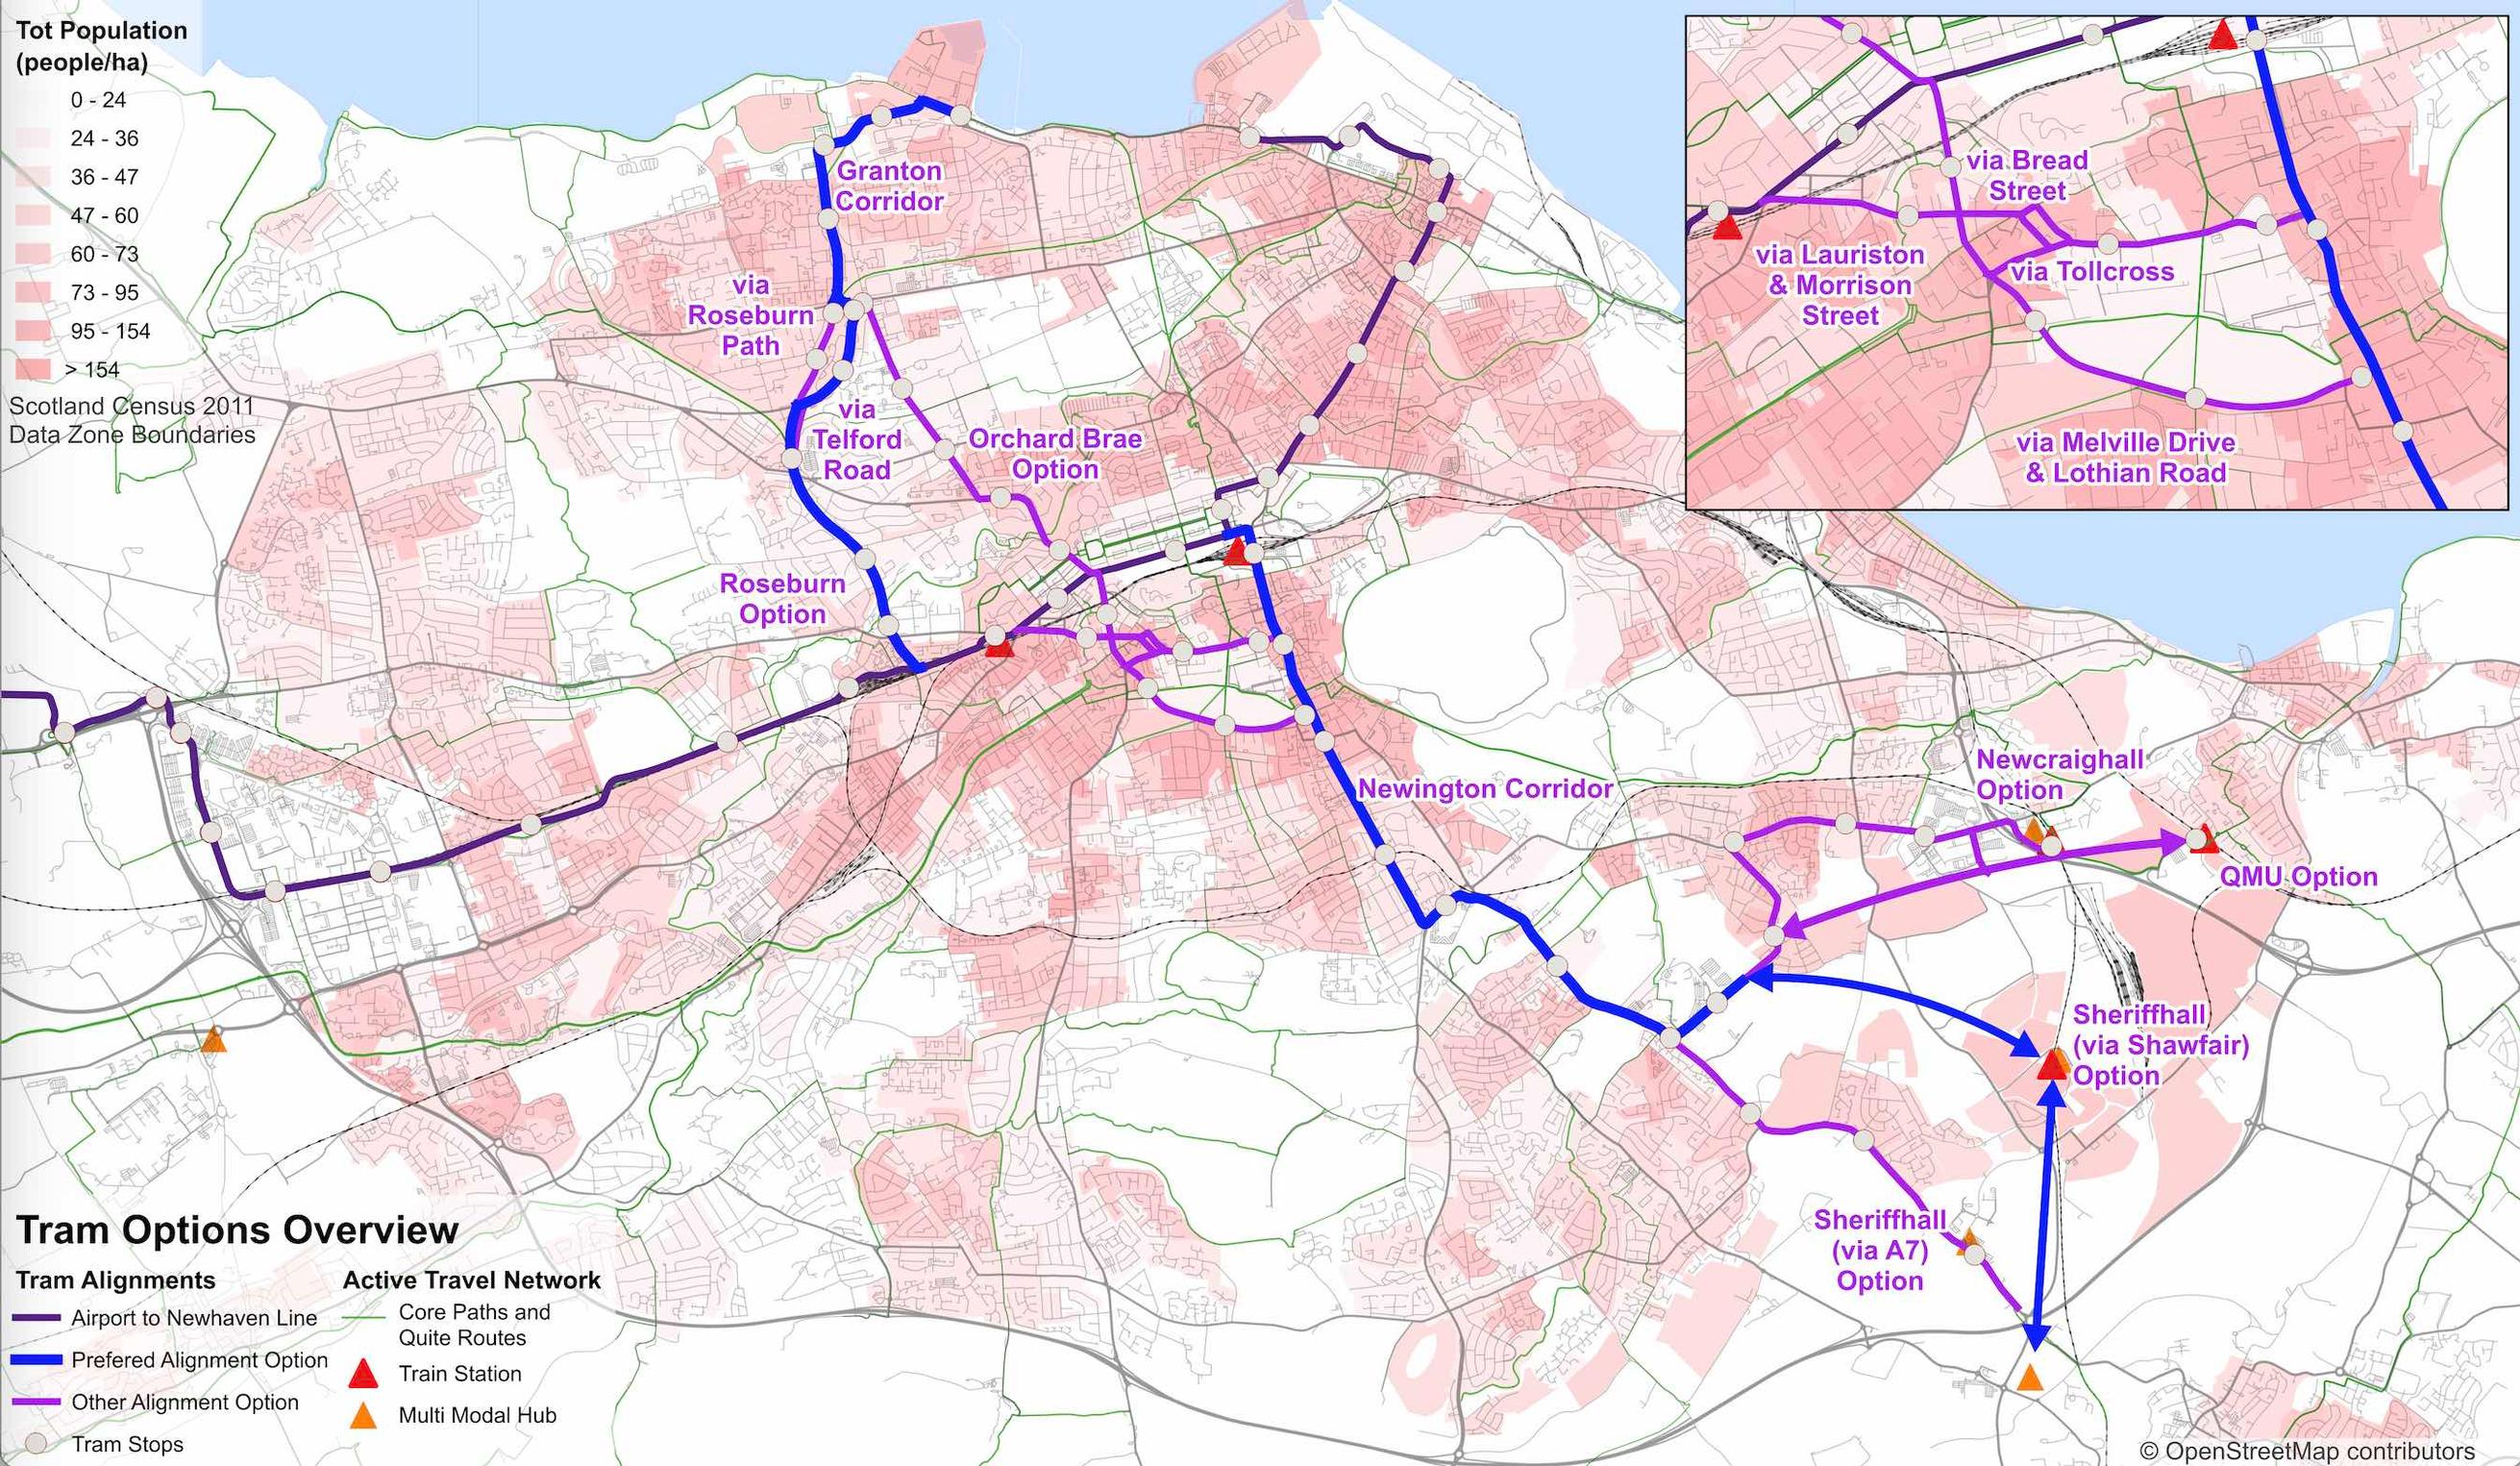 The proposed tram line would run north-south from run from Granton through the city centre to the BioQuarter